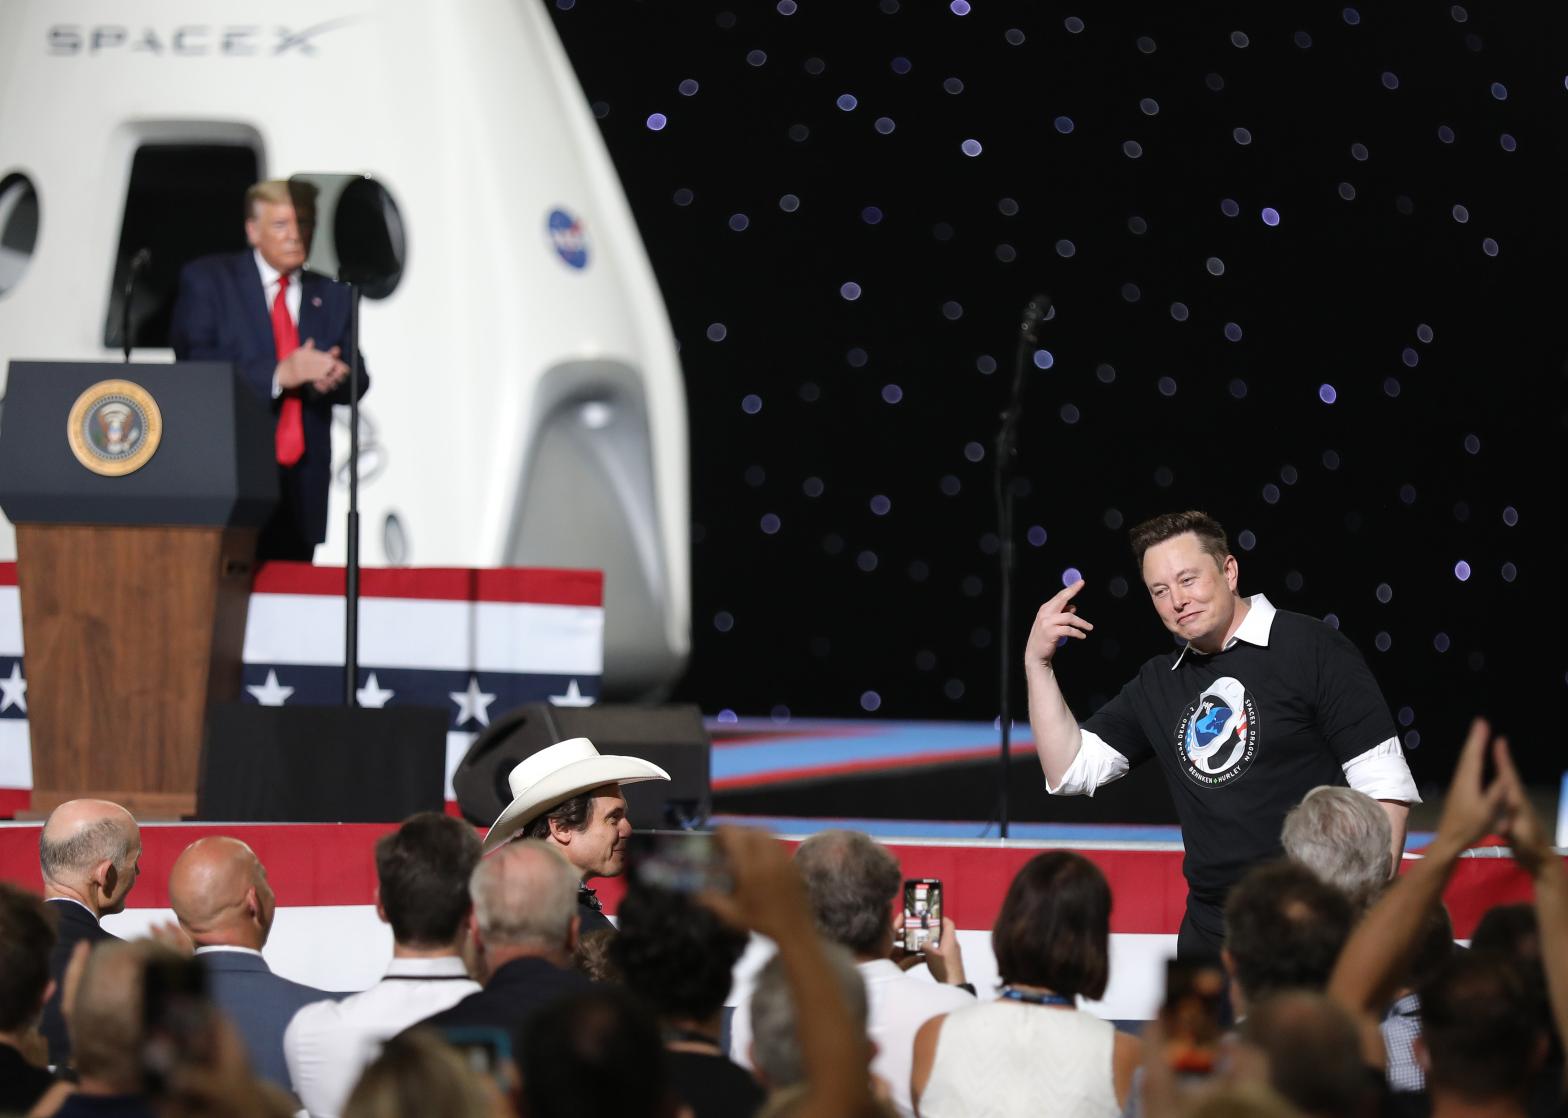 Donald Trump acknowledges SpaceX founder Elon Musk after the successful launch of the SpaceX Falcon 9 rocket in May, 2020. (Photo: Joe Raedle, Getty Images)